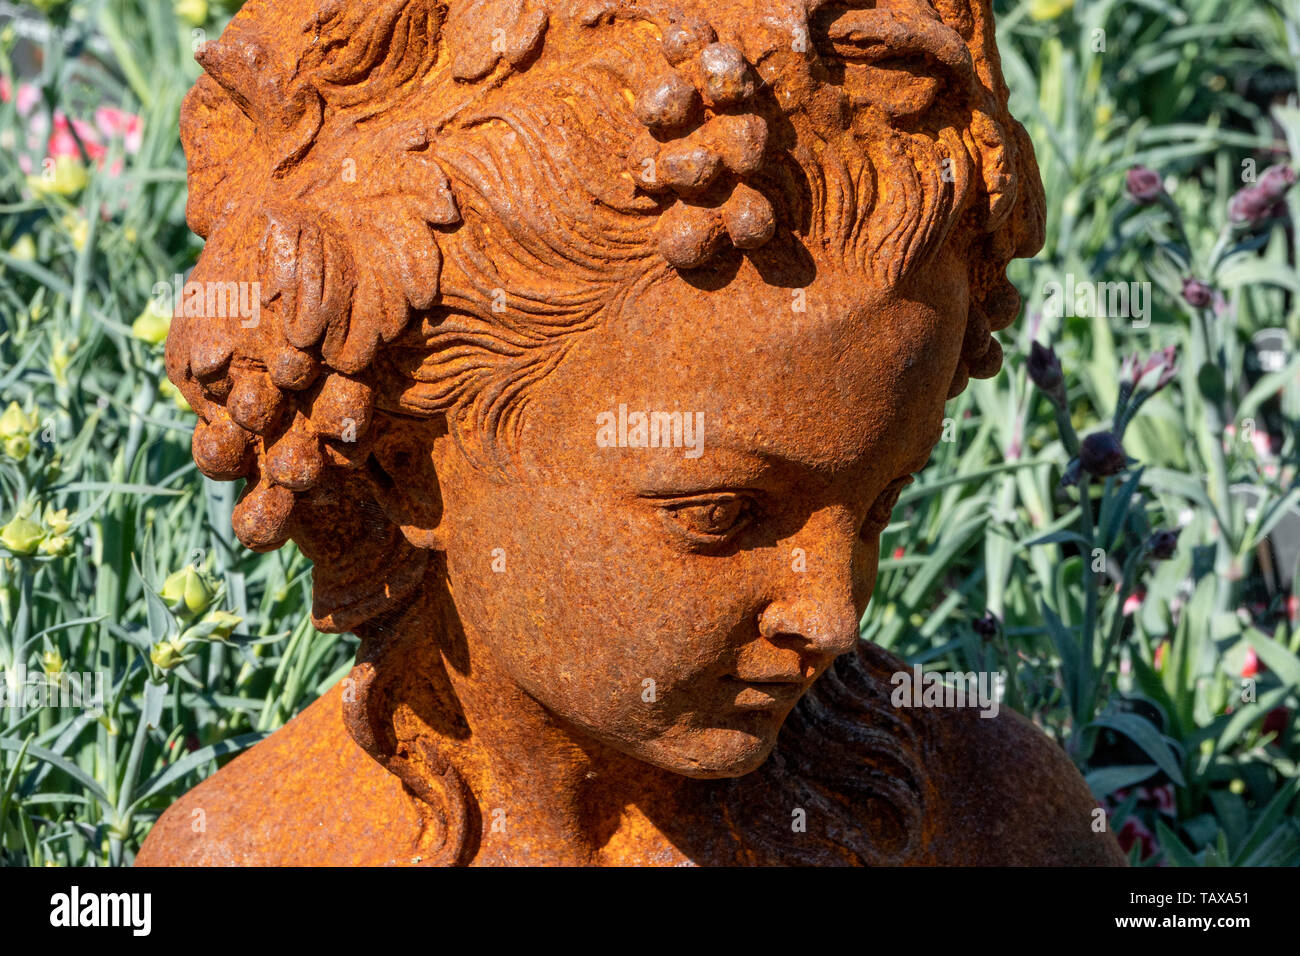 A lifelike female statue head cast in metal with heavy rust against dense green foliage used as a garden ornament Stock Photo